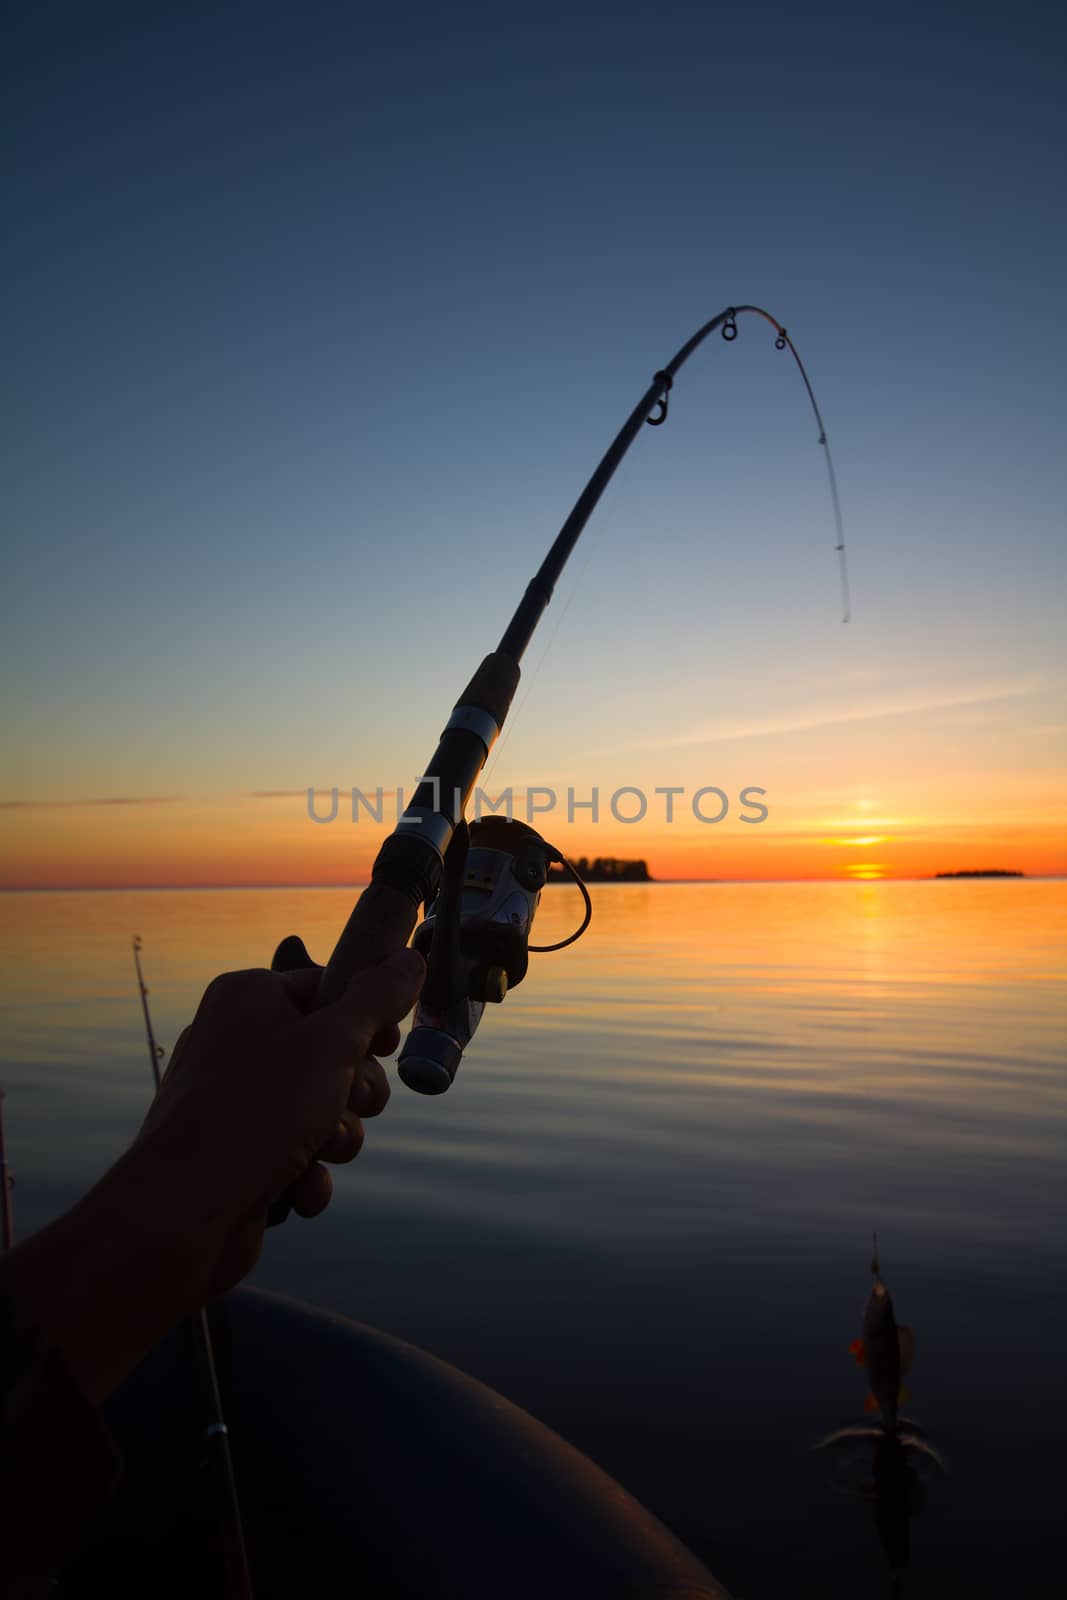 Sunset river perch fishing with the boat and a rod by max51288